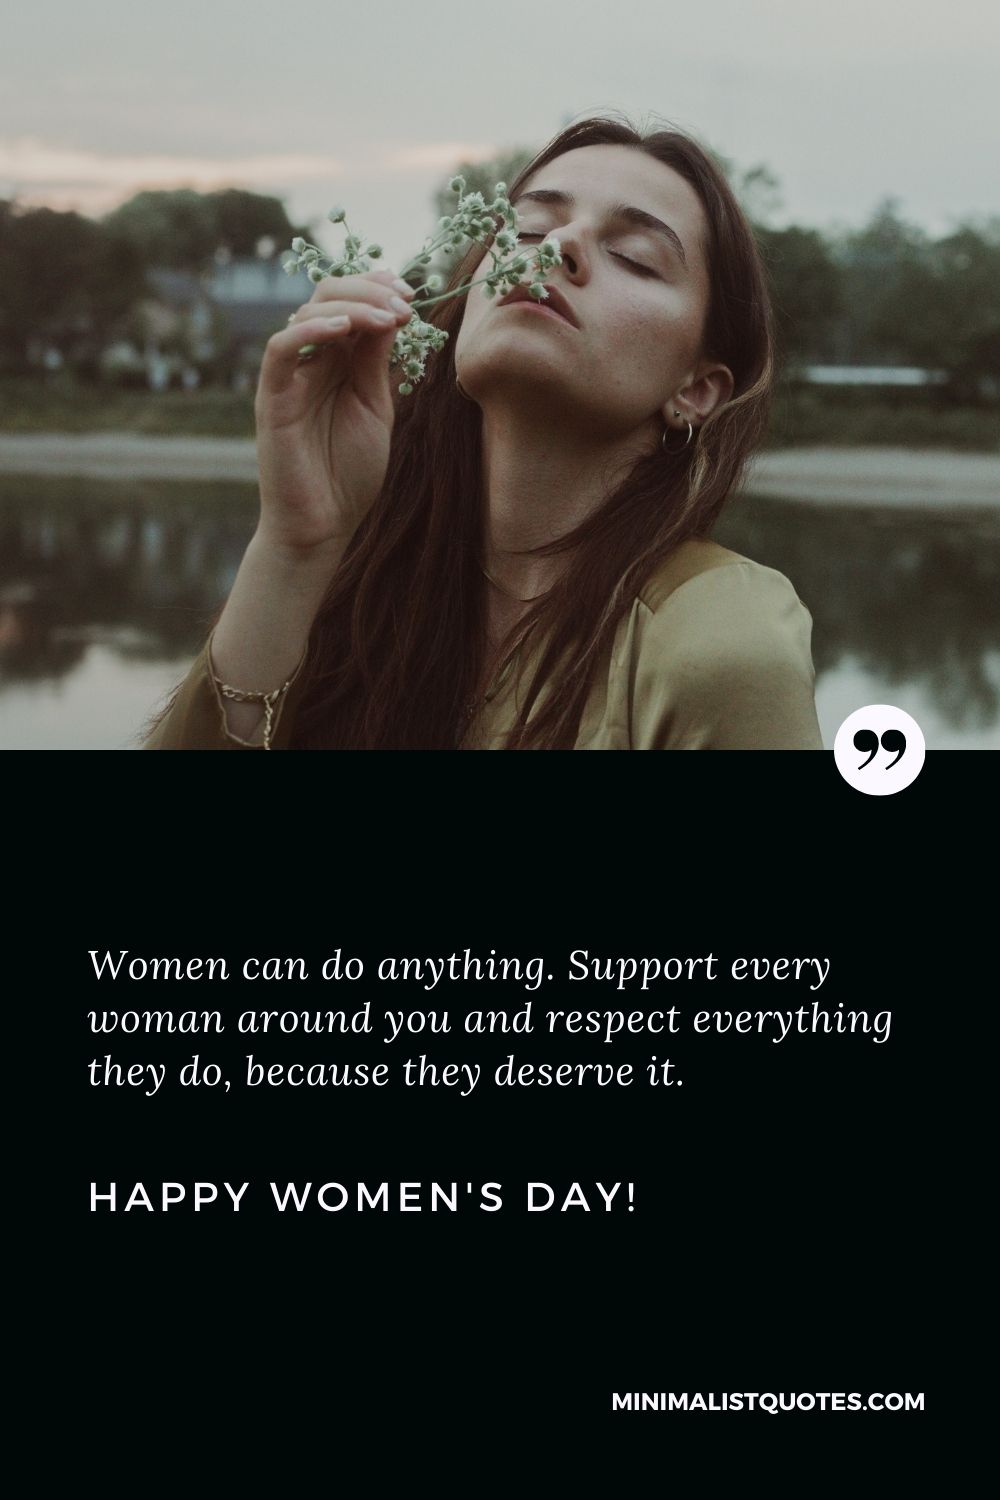 International women's day wishes: Women can do anything. Support every woman around you and respect everything they do, because they deserve it. Happy Womens Day!